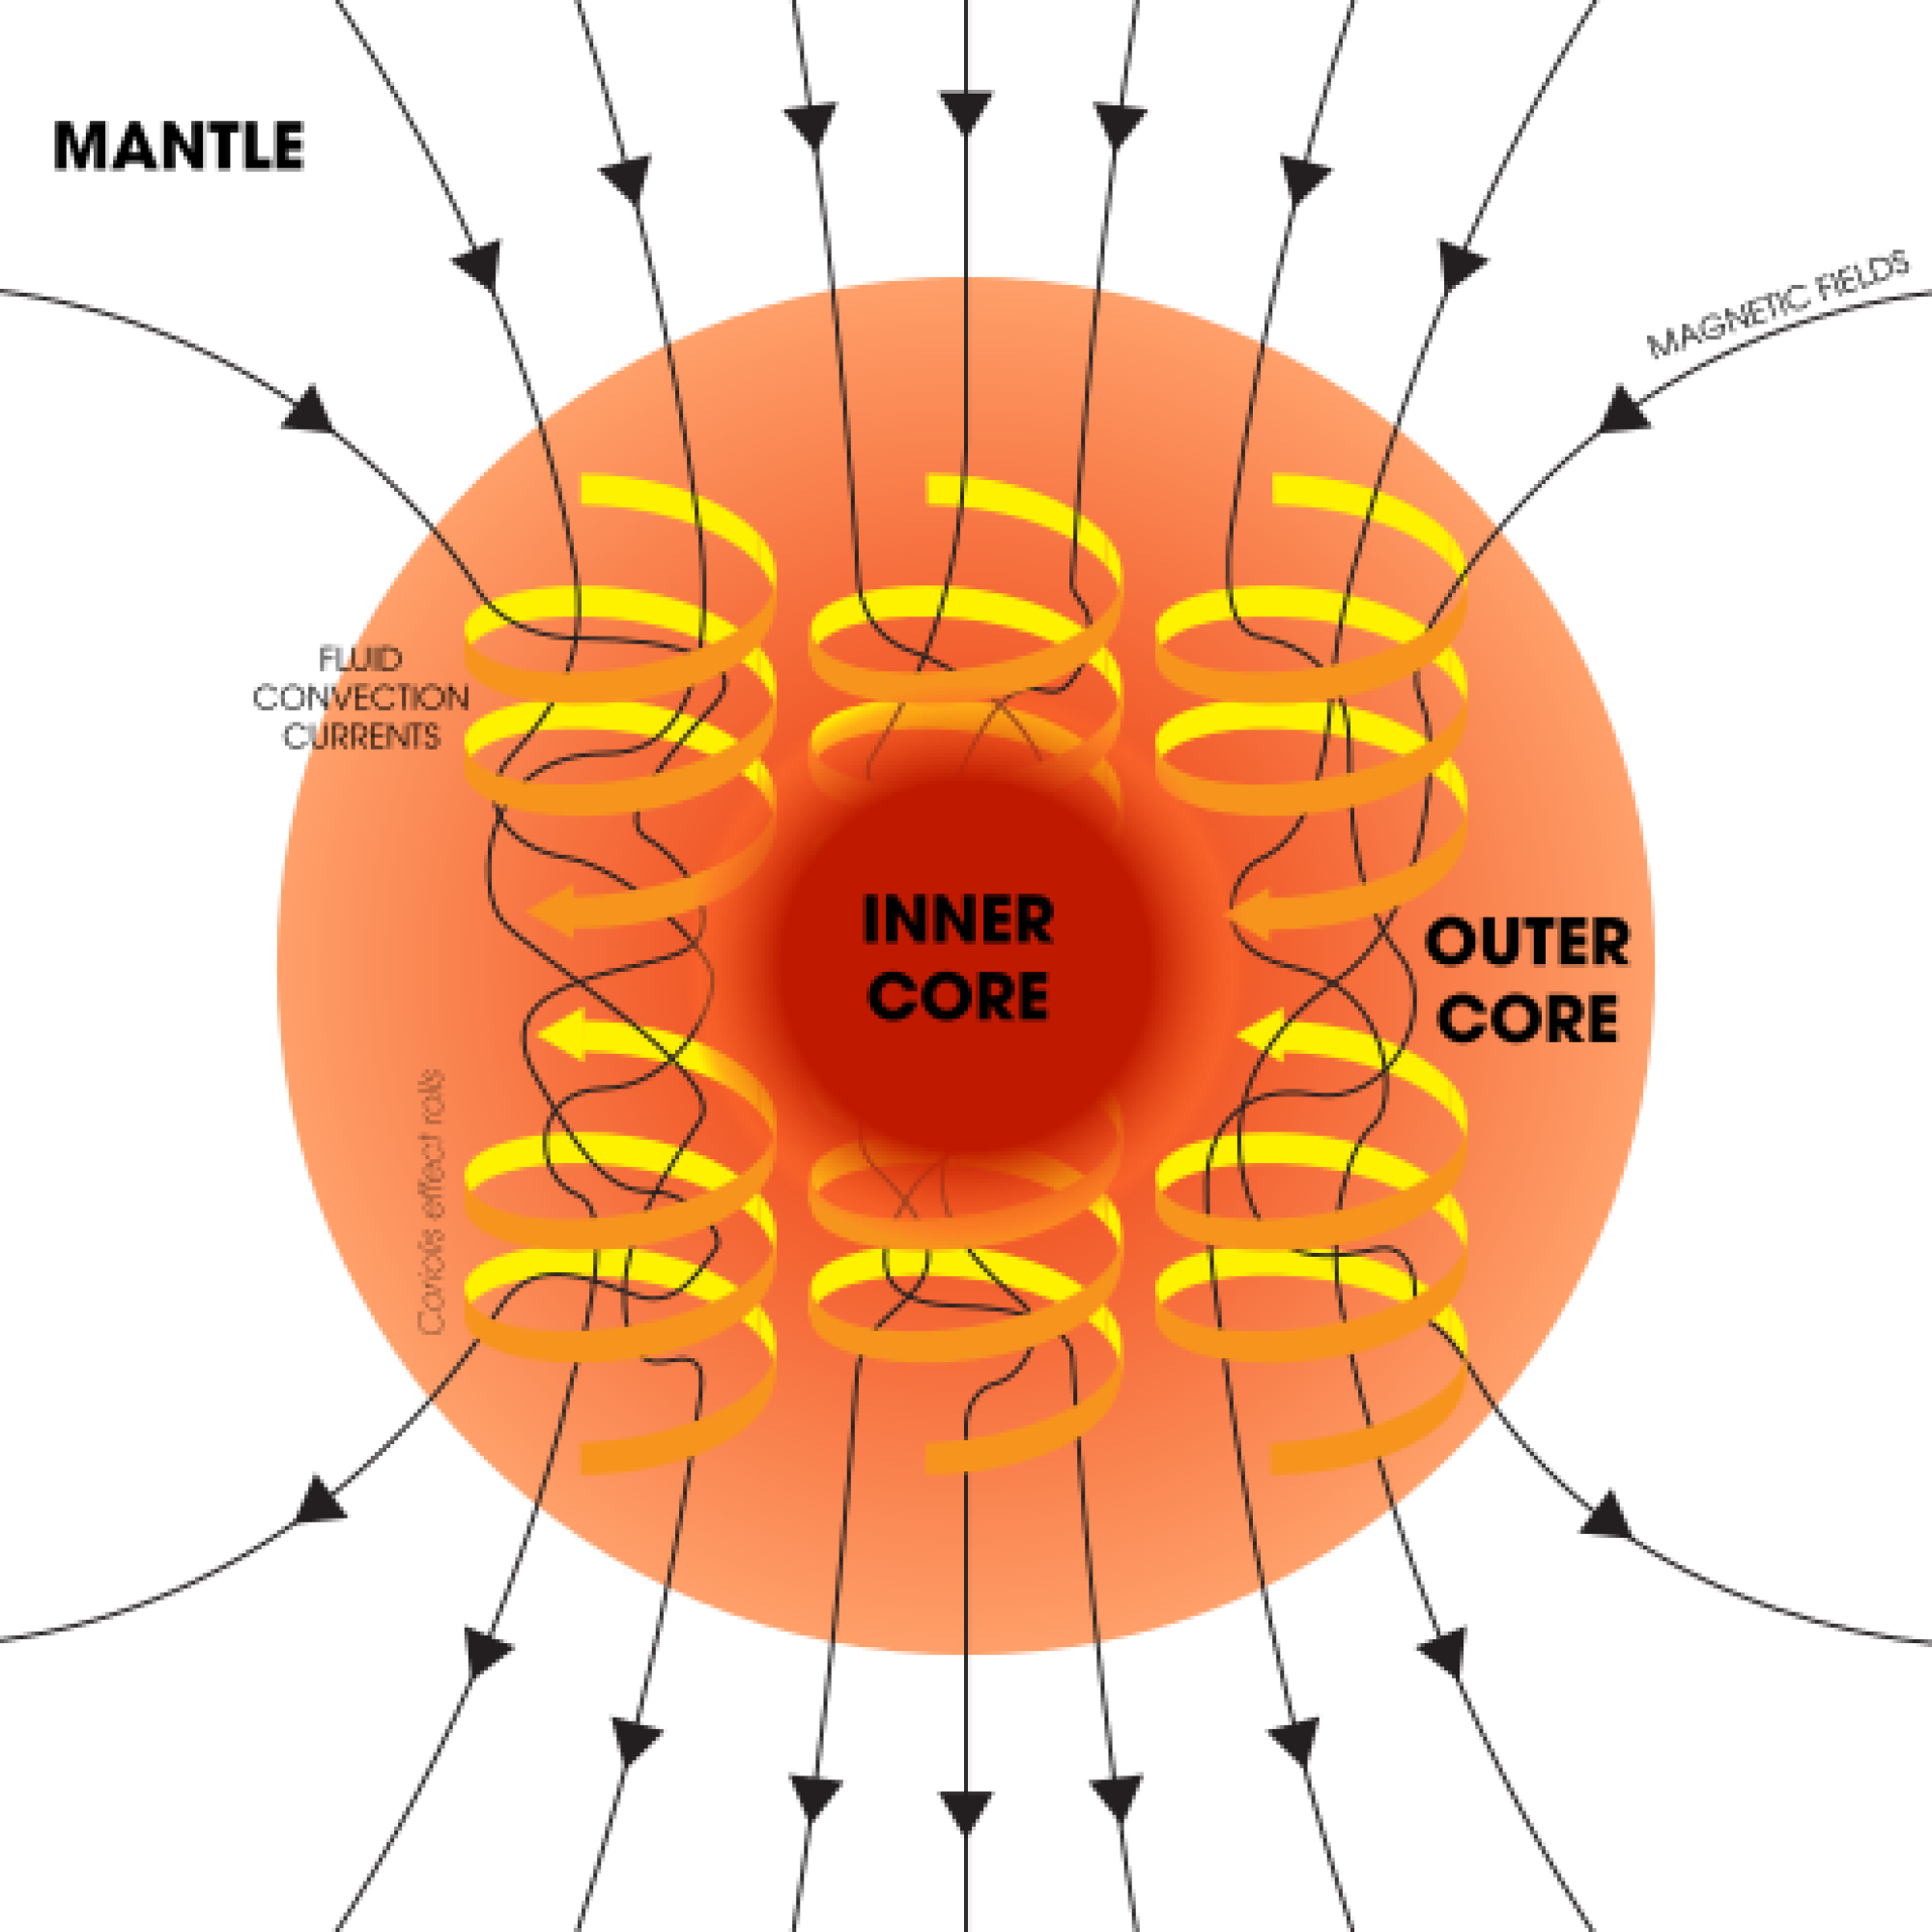 electric currents created in the outer core that produce Earth's magnetic field